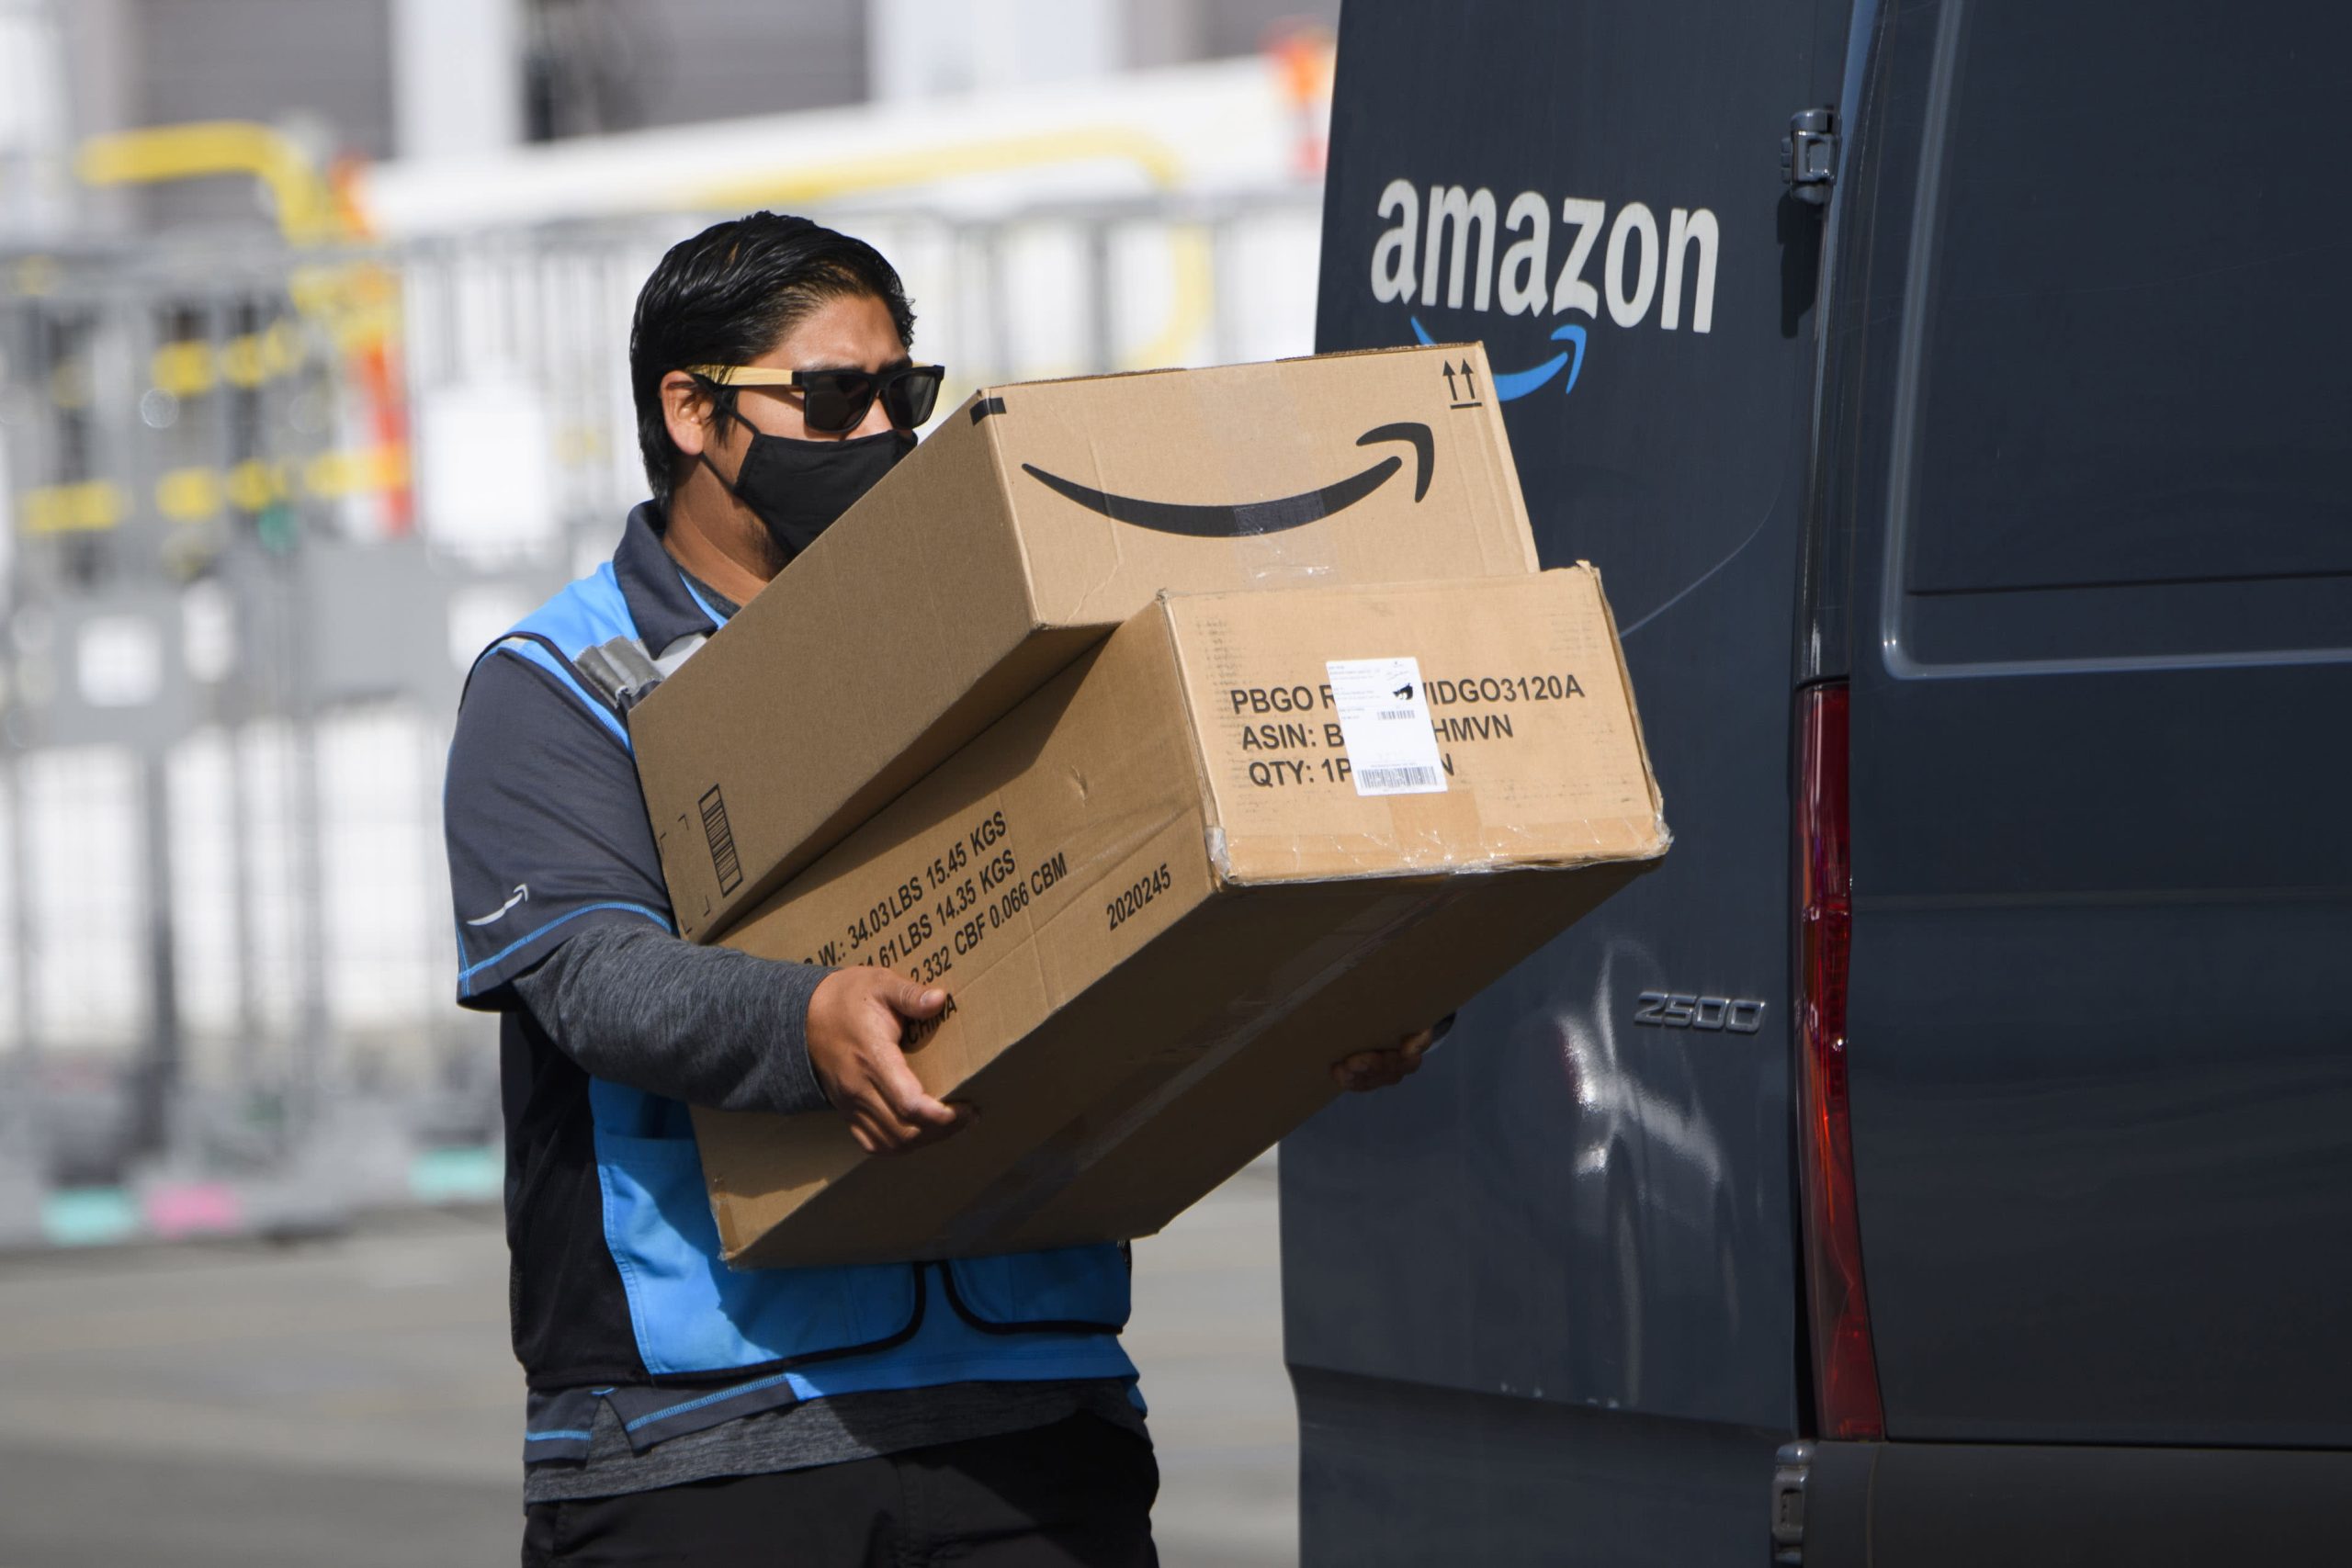 Amazon Delivery Uniform-Wearing Man Committing Bank Fraud in California